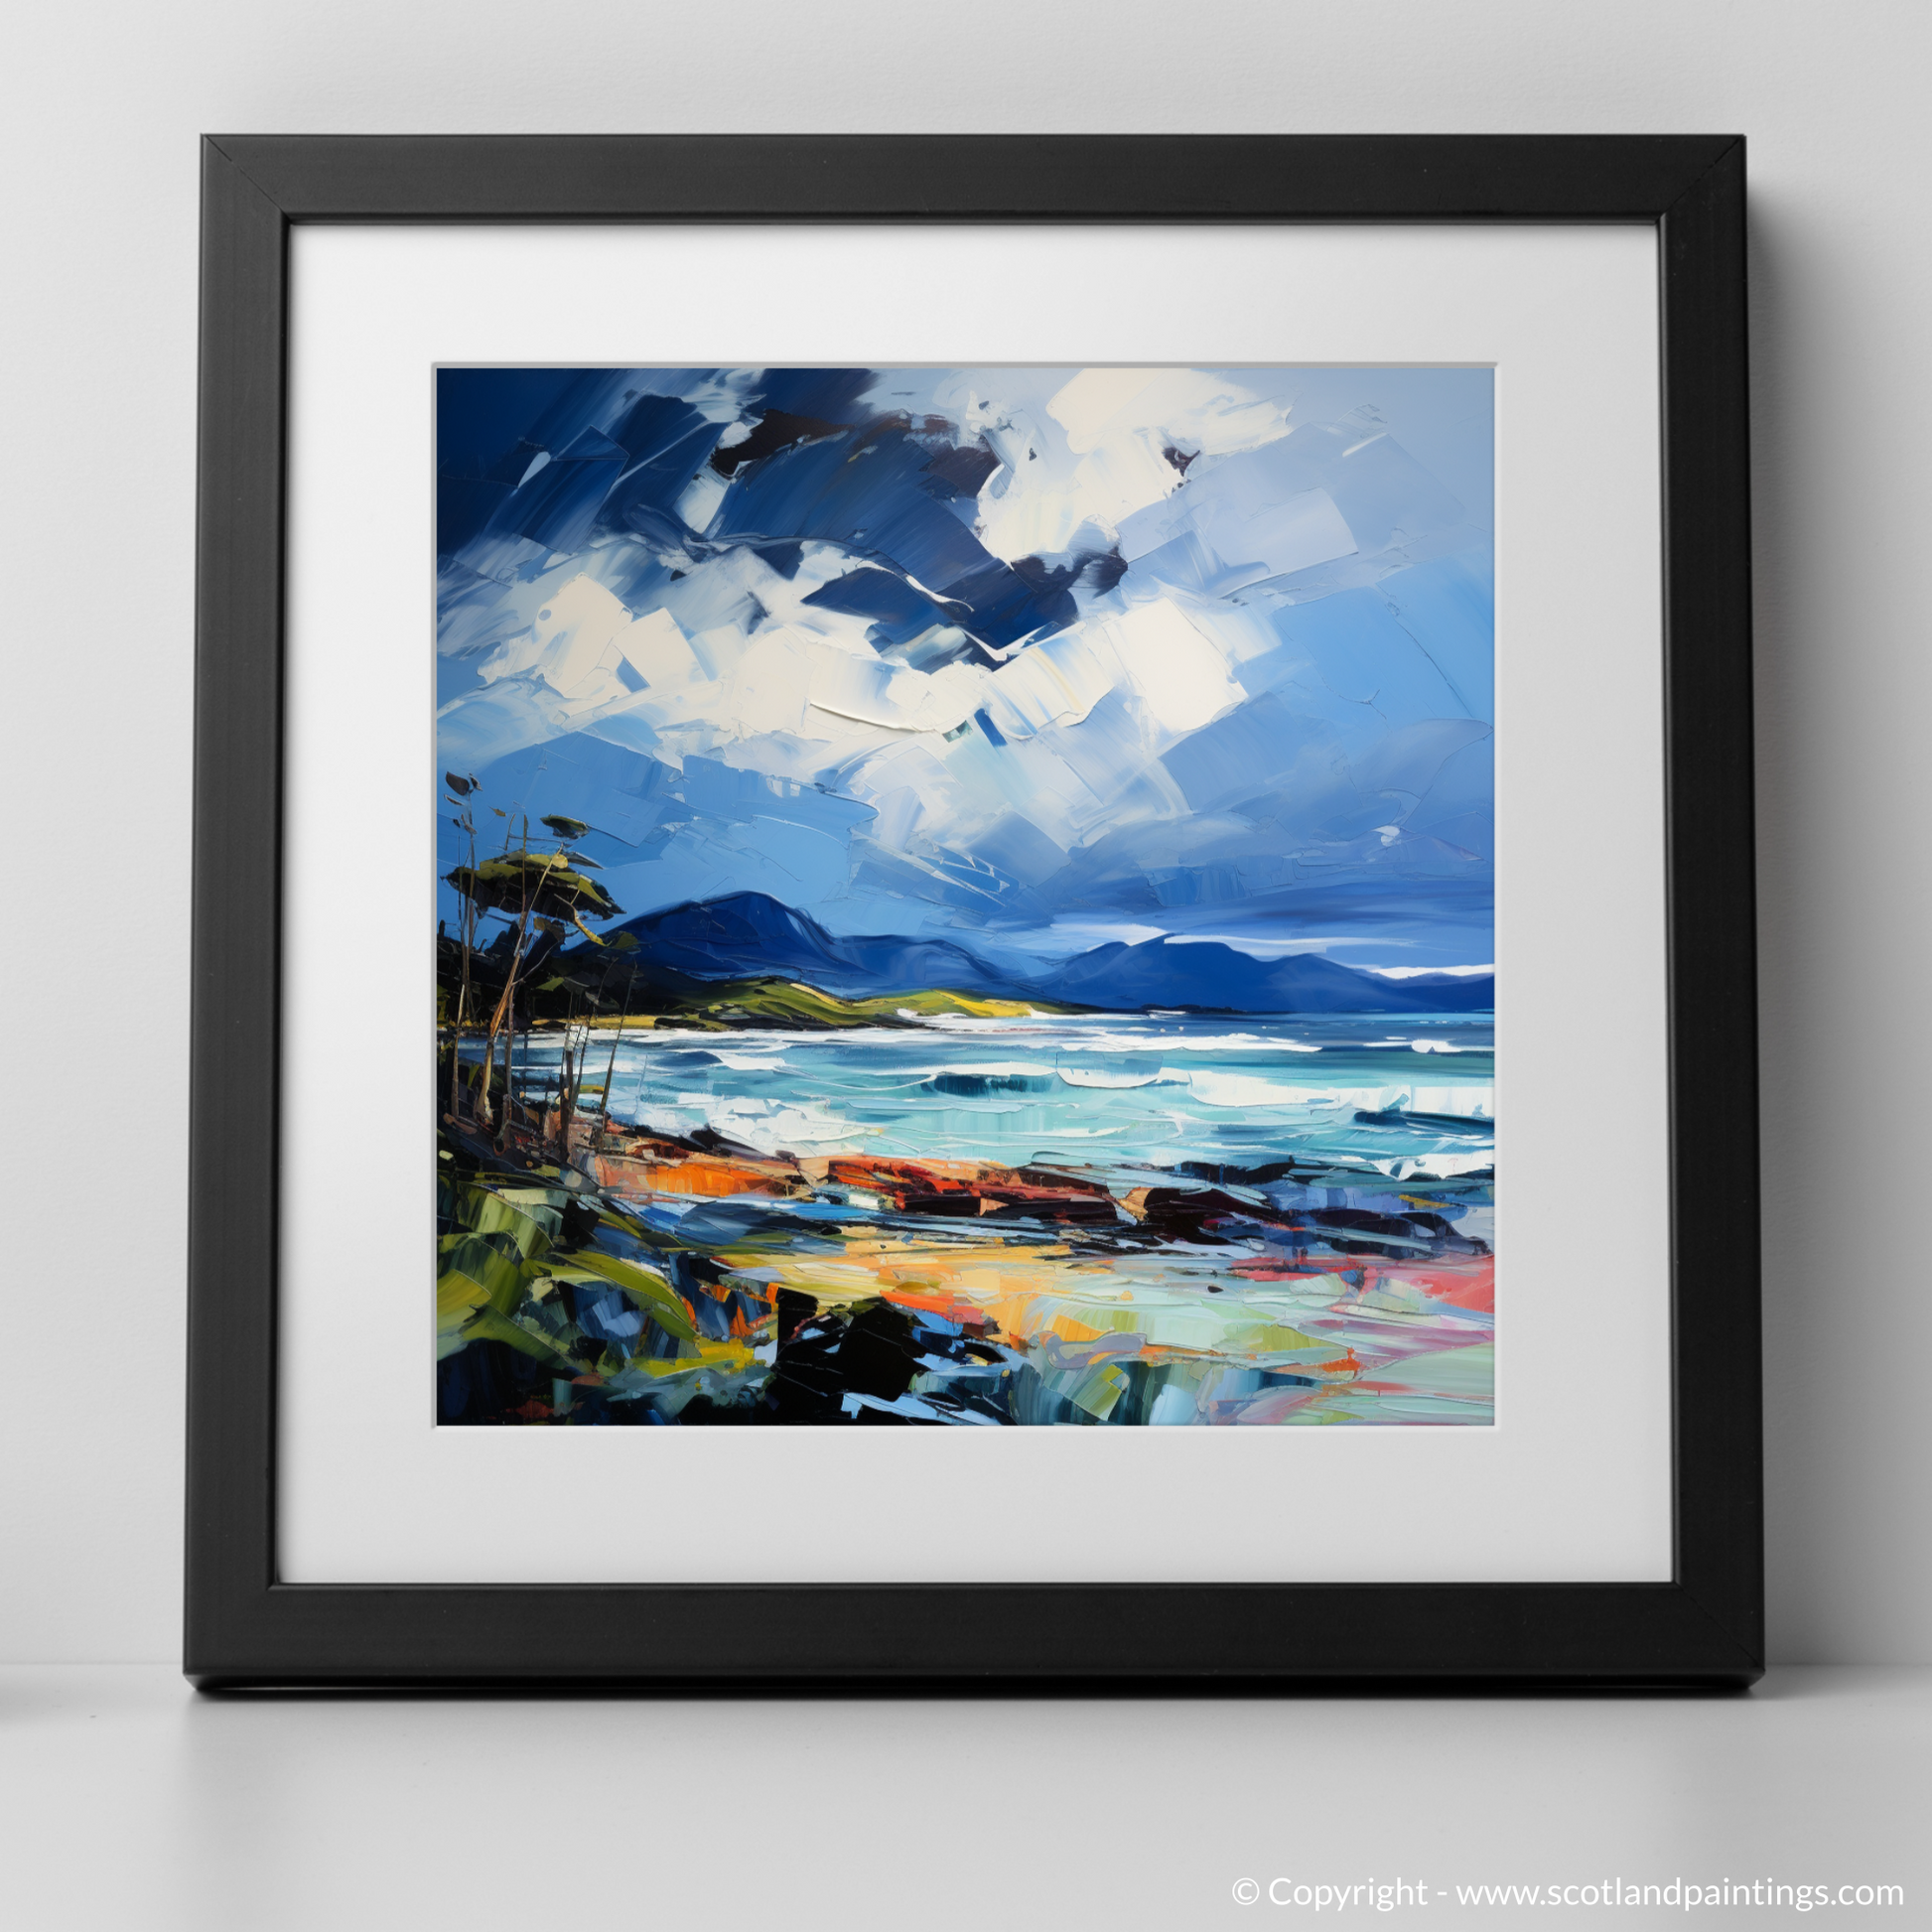 Art Print of Ardalanish Bay with a stormy sky with a black frame